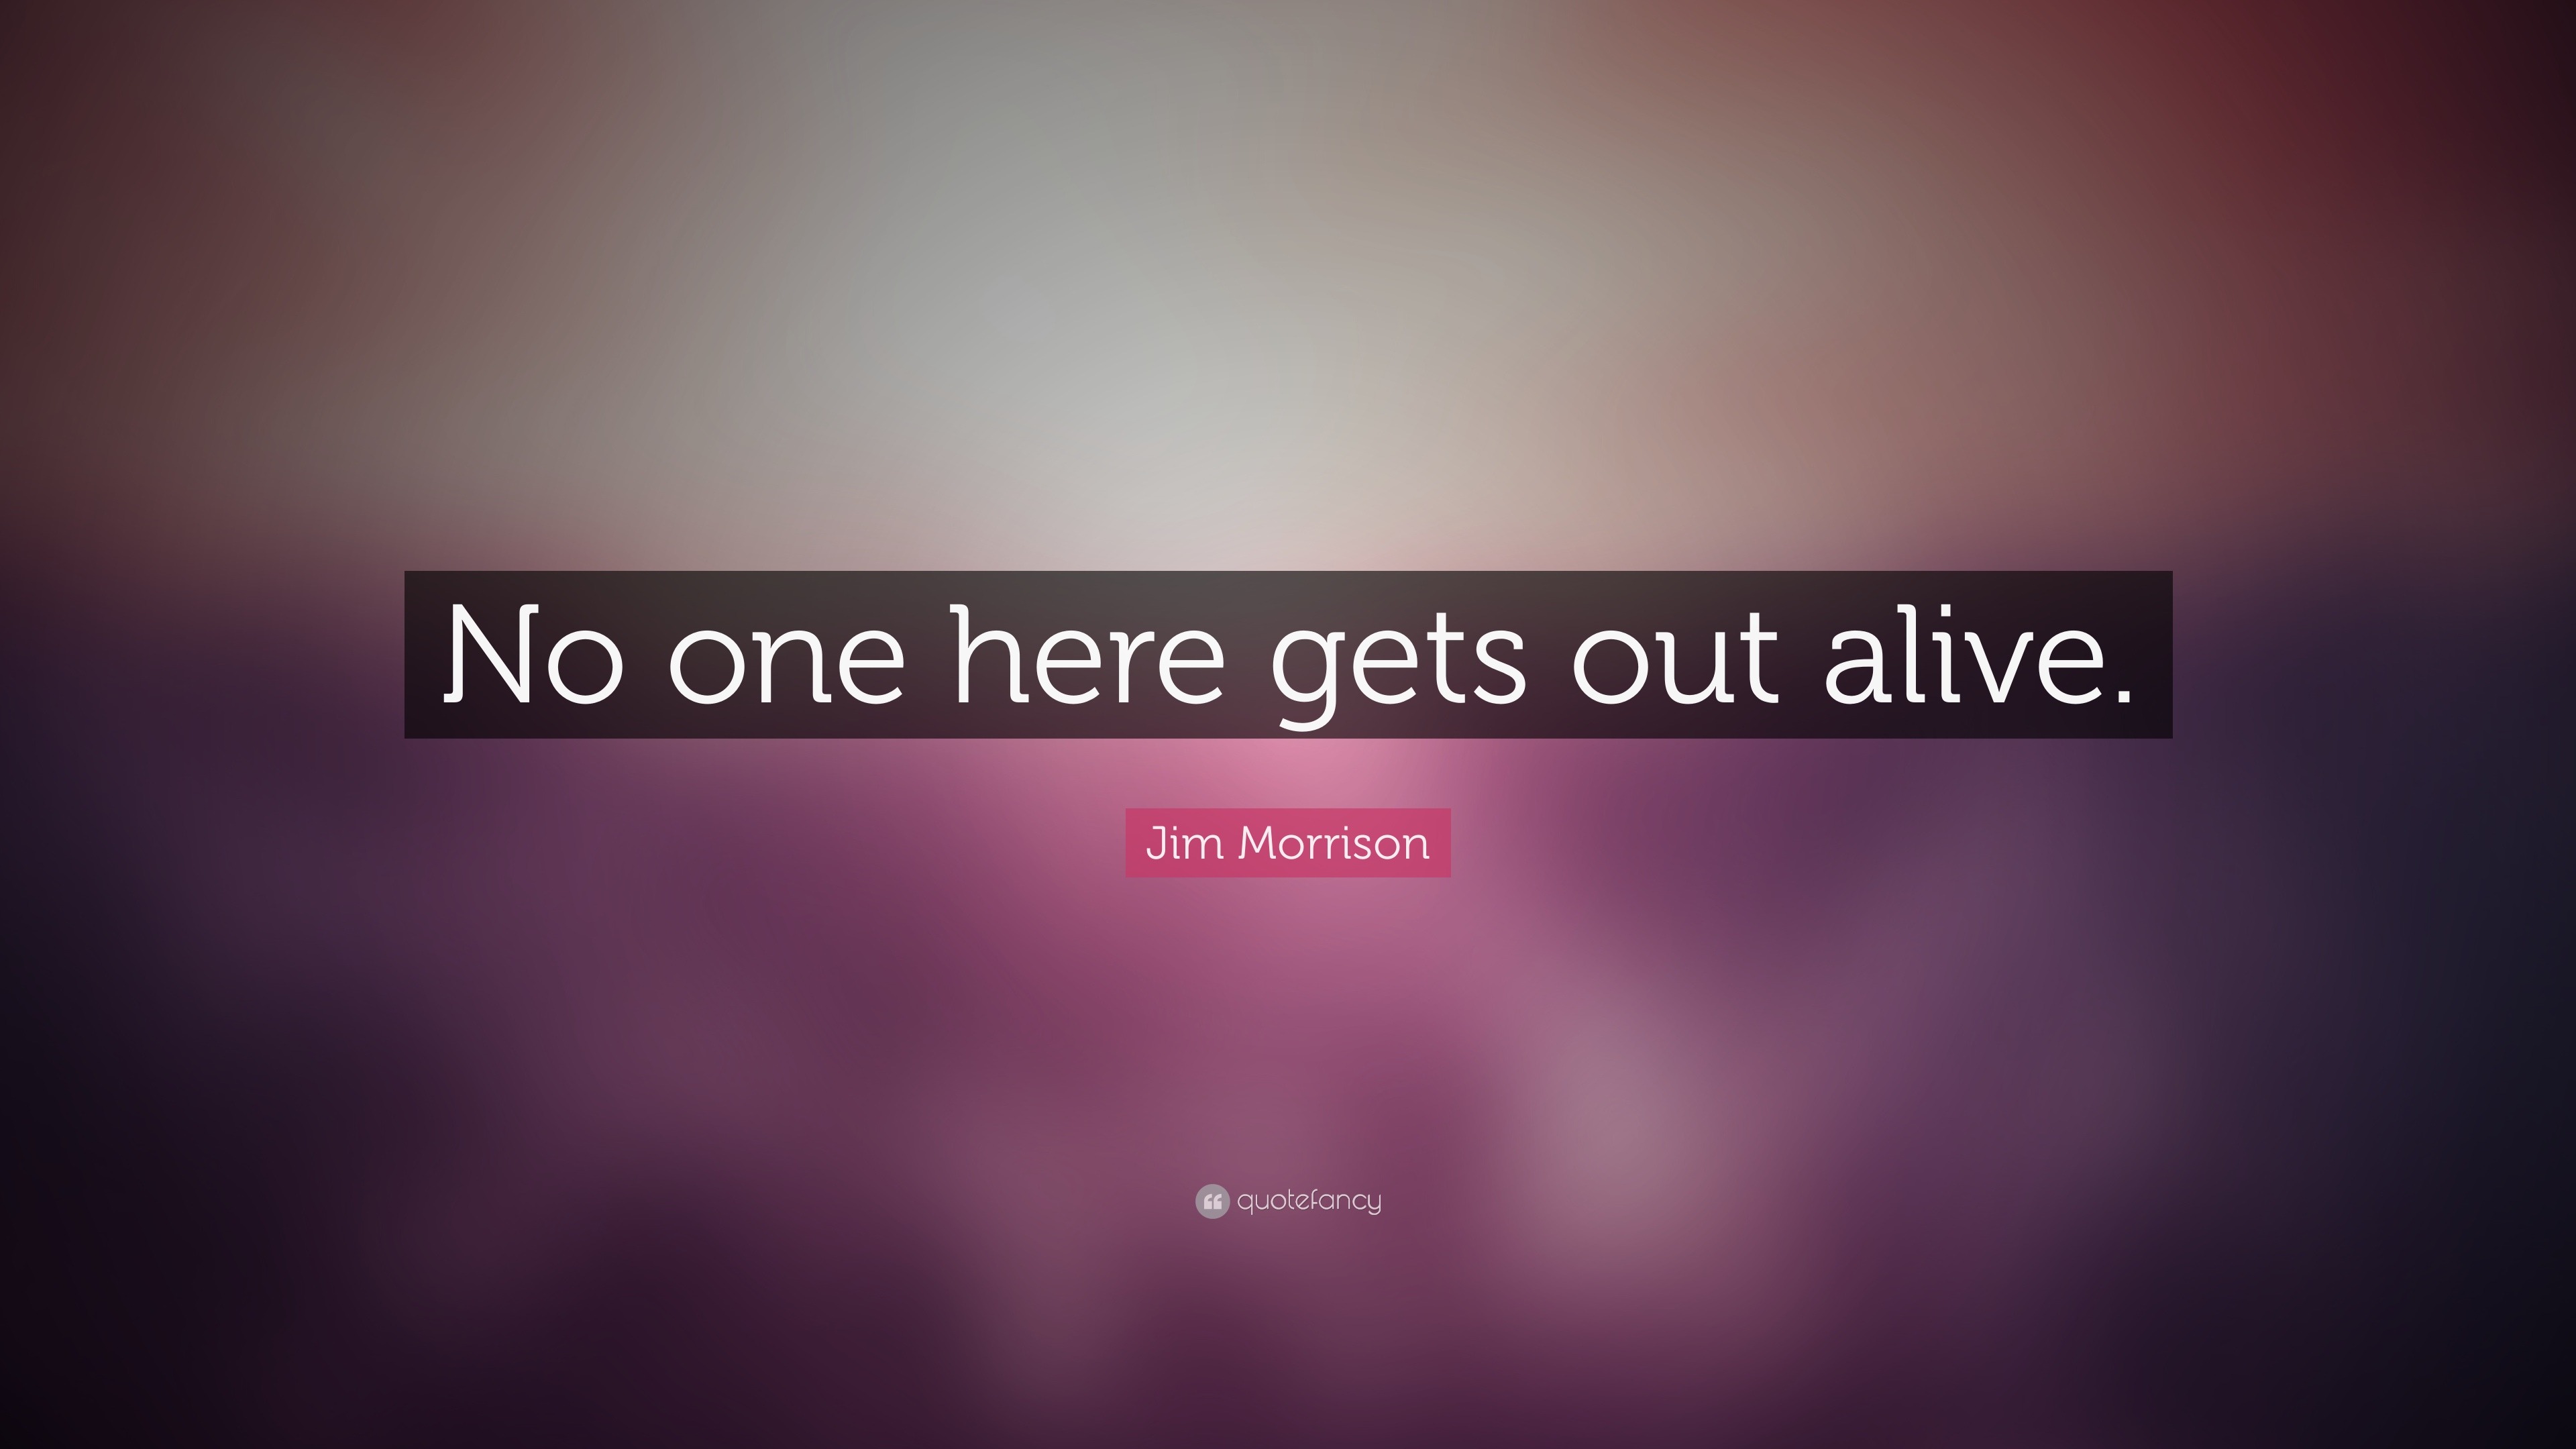 Jim Morrison Quote: “No One Here Gets Out Alive.”